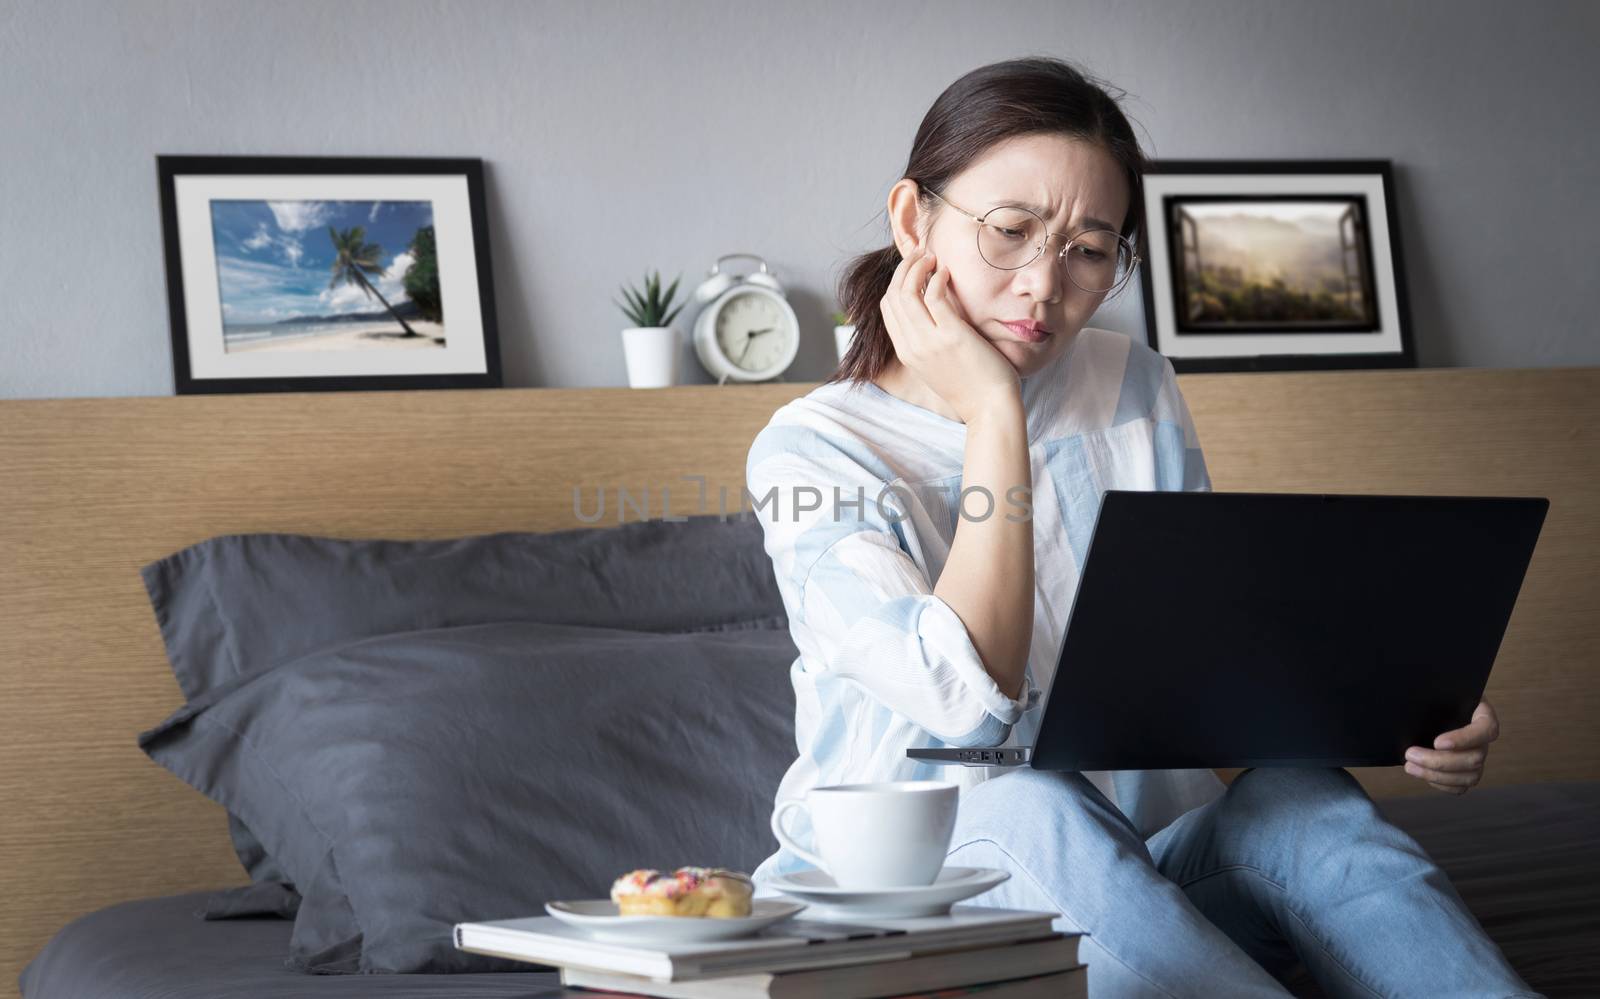 working from home, new normal concept. woman working with laptop computer on bed from her room during self isolation with stress emotion during transmission of COVID-19 Coronavirus pandemic by asiandelight